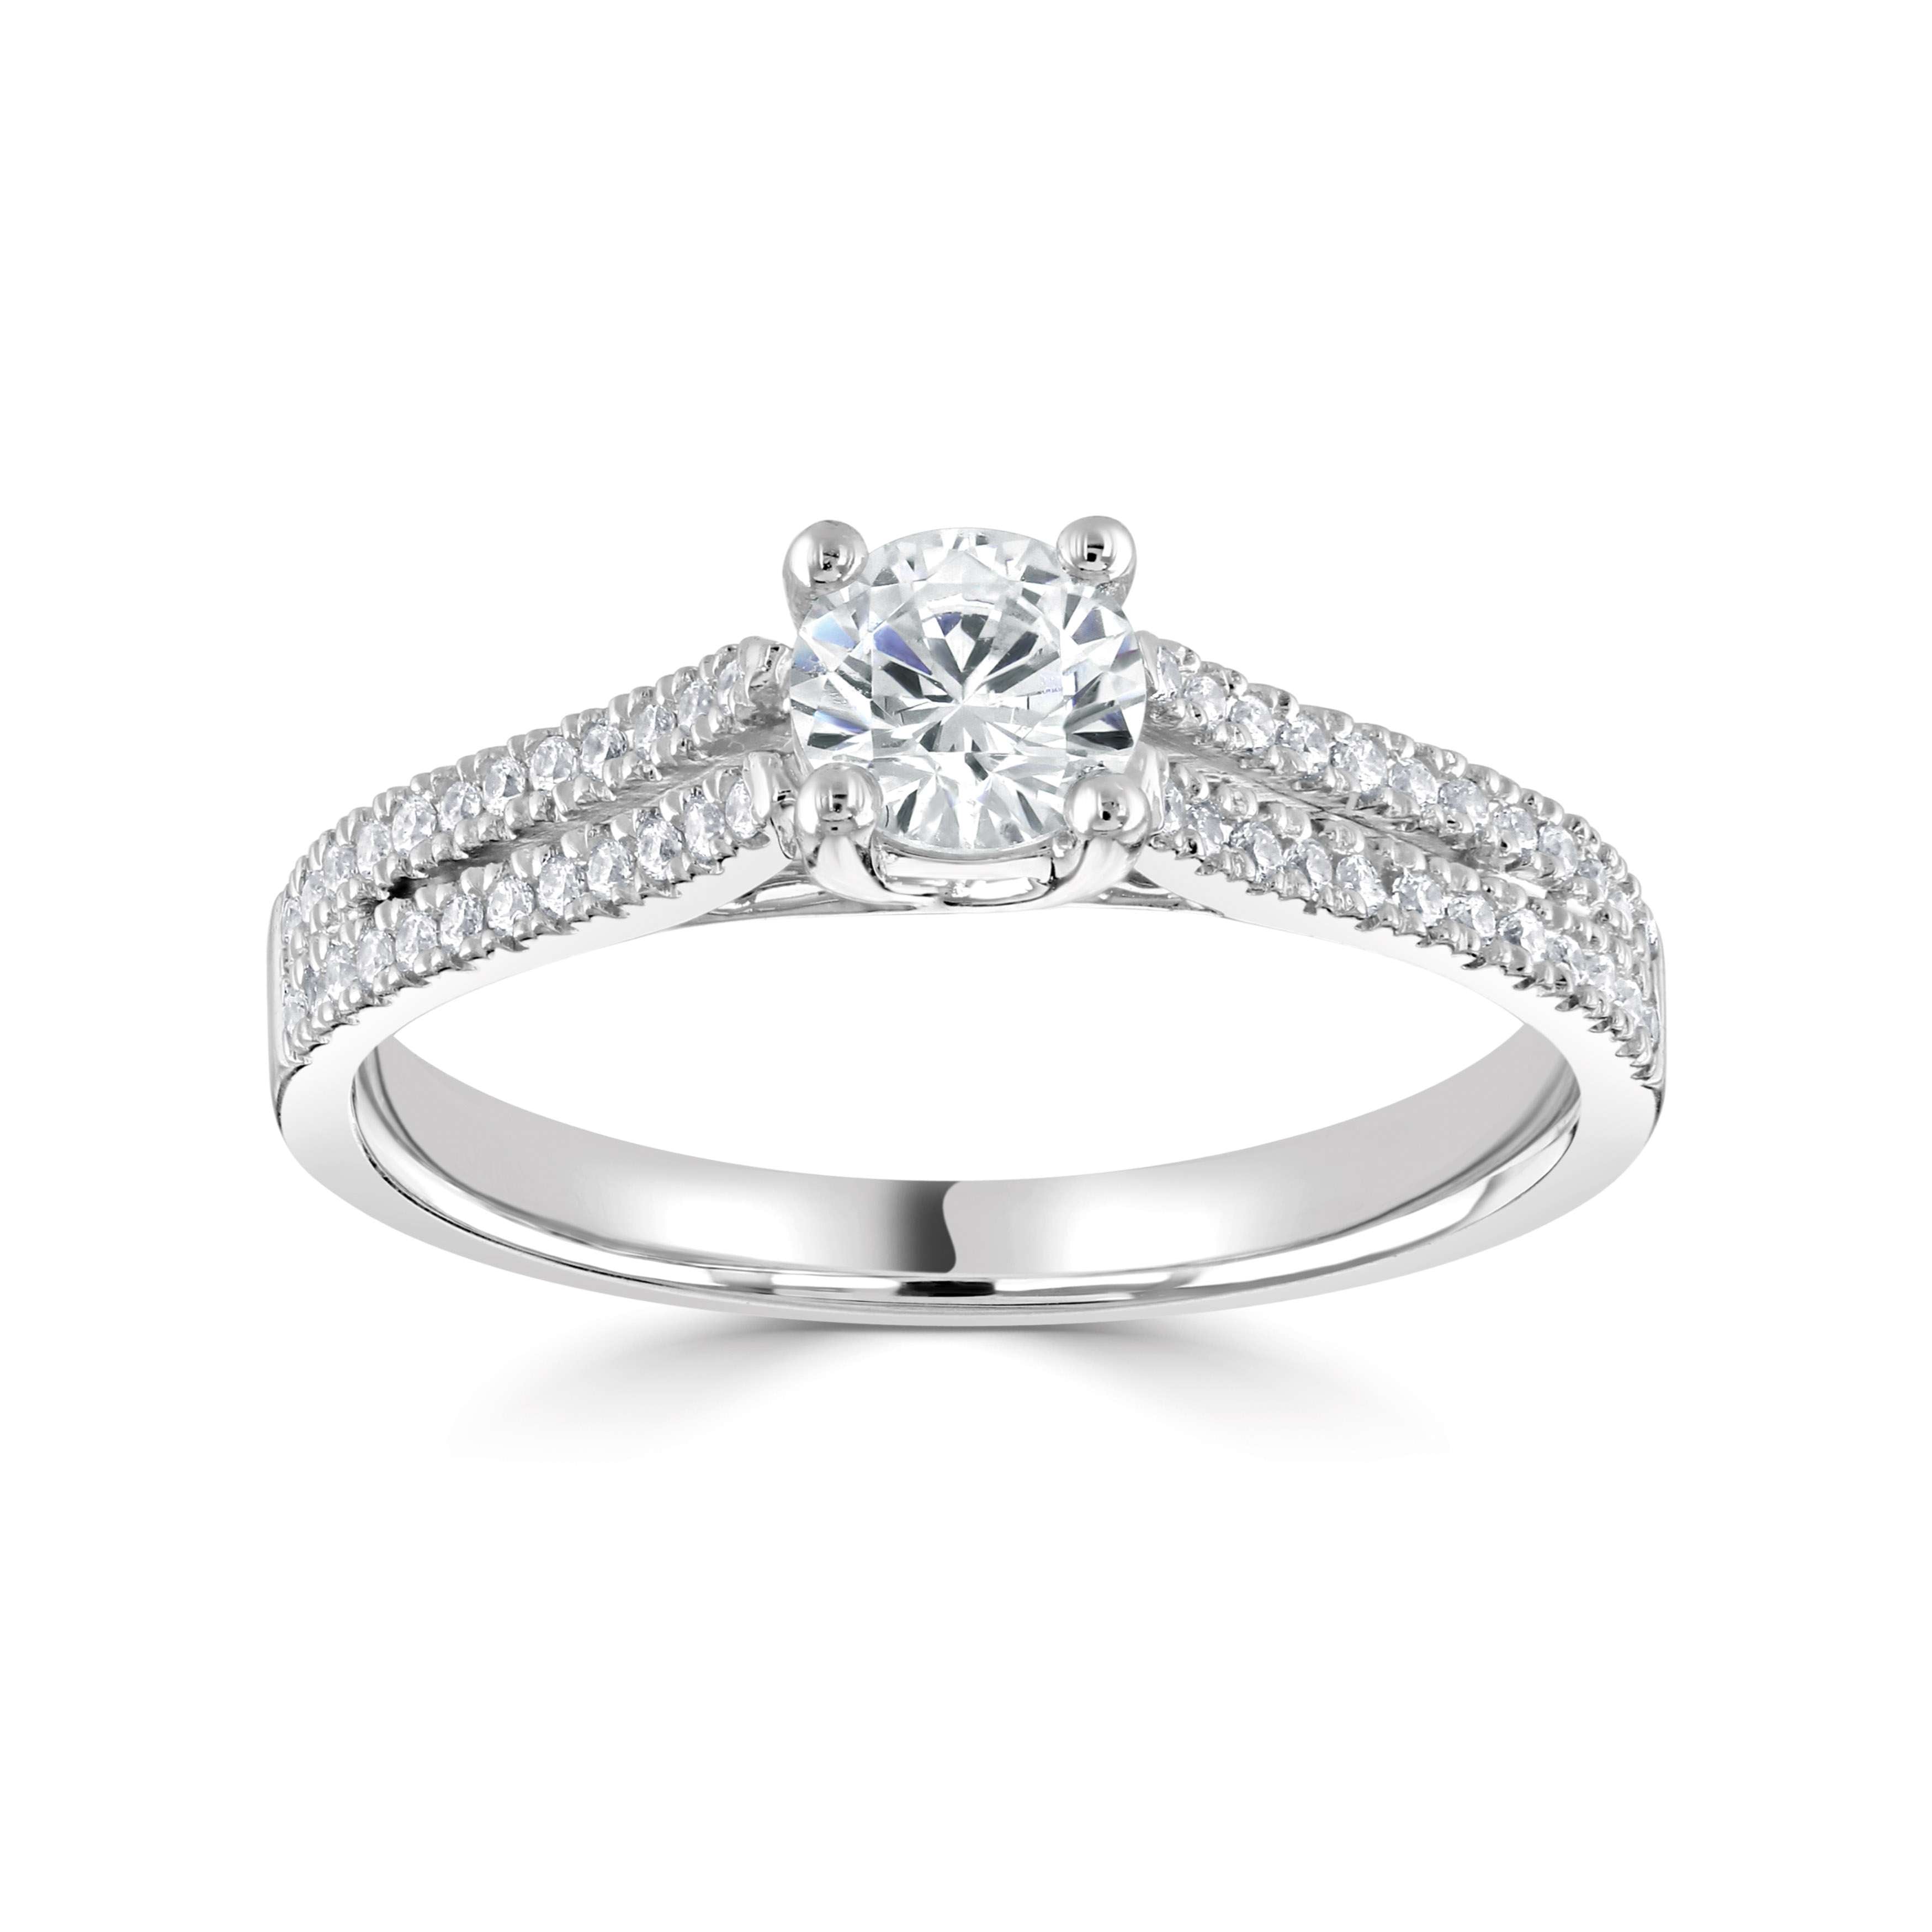 Evelynn *Select a Round Diamond 0.25ct or above